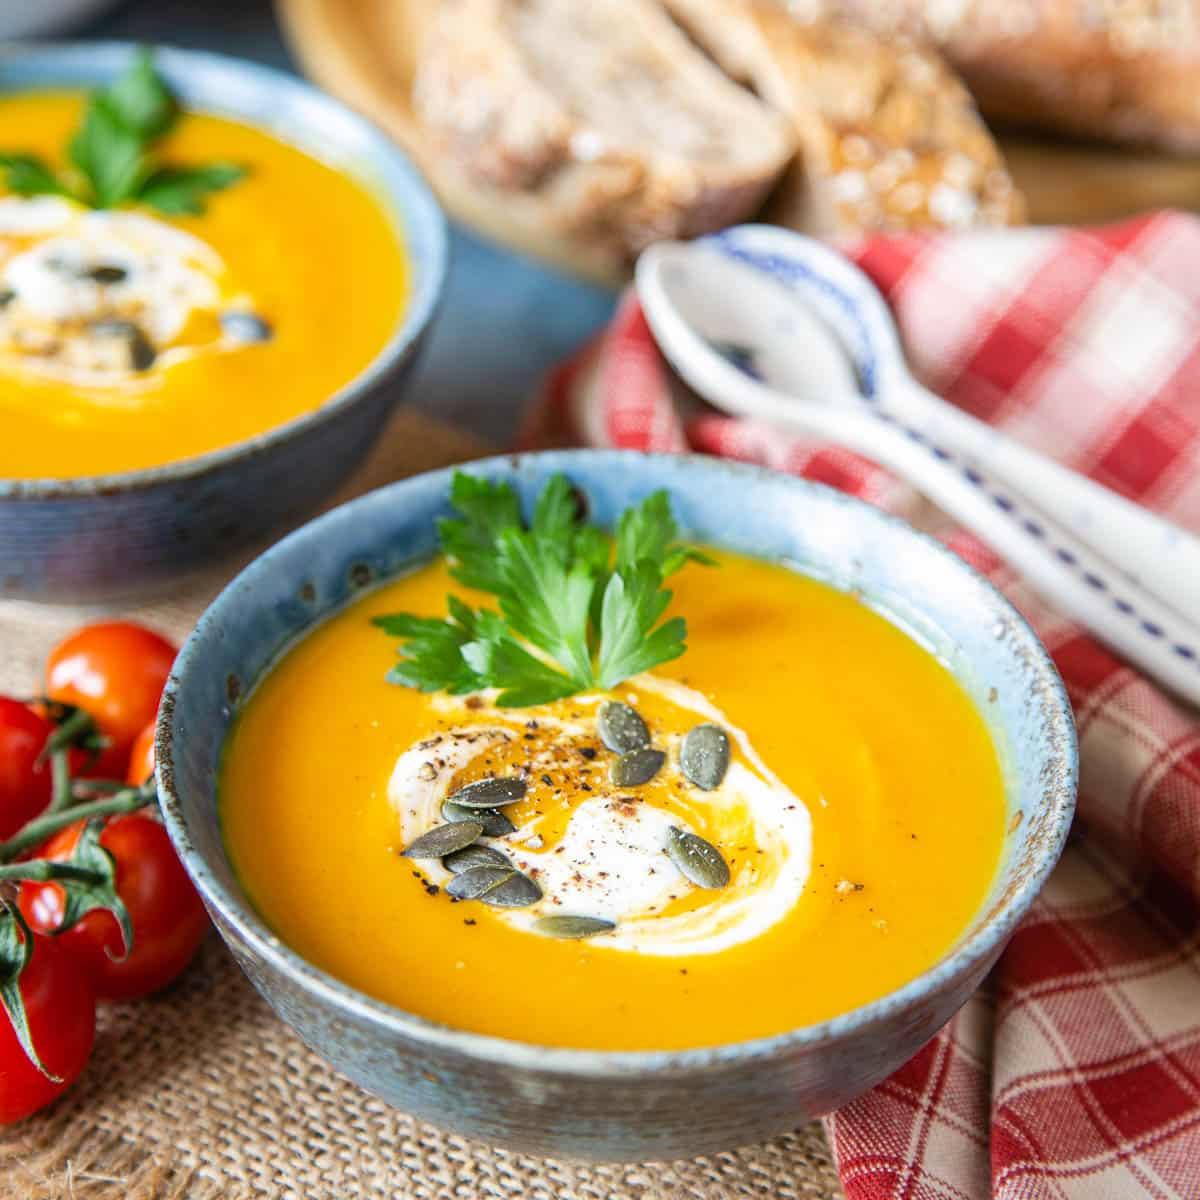 https://fussfreeflavours.com/wp-content/uploads/2023/03/Sweet-Potato-Carrot-Soup-Images-featured.jpg